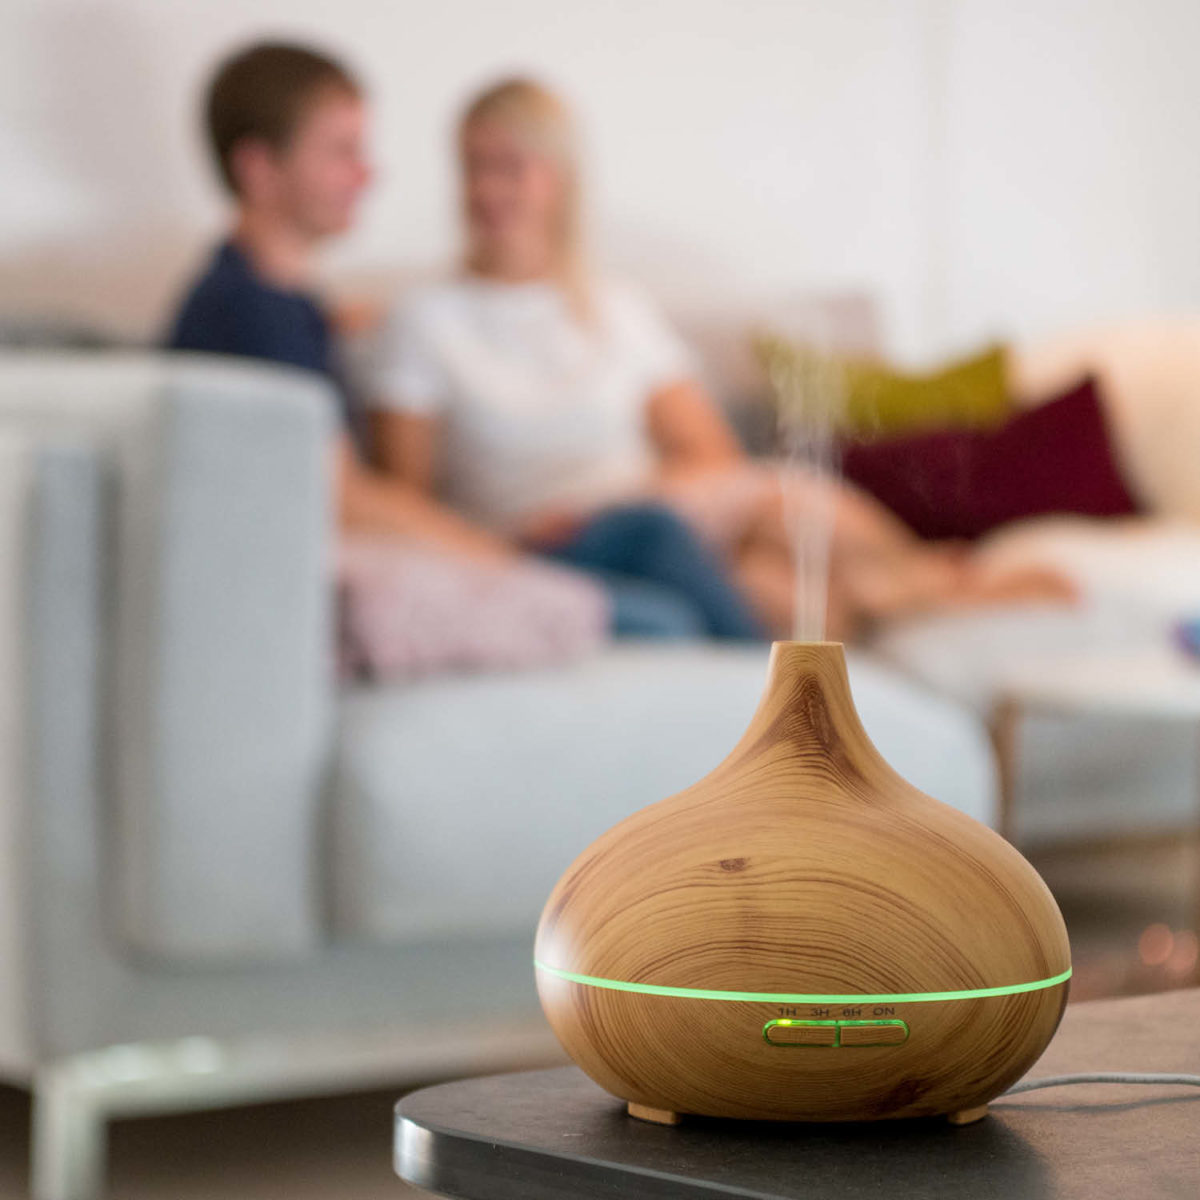 Aroma diffuser - wood print with LED lights